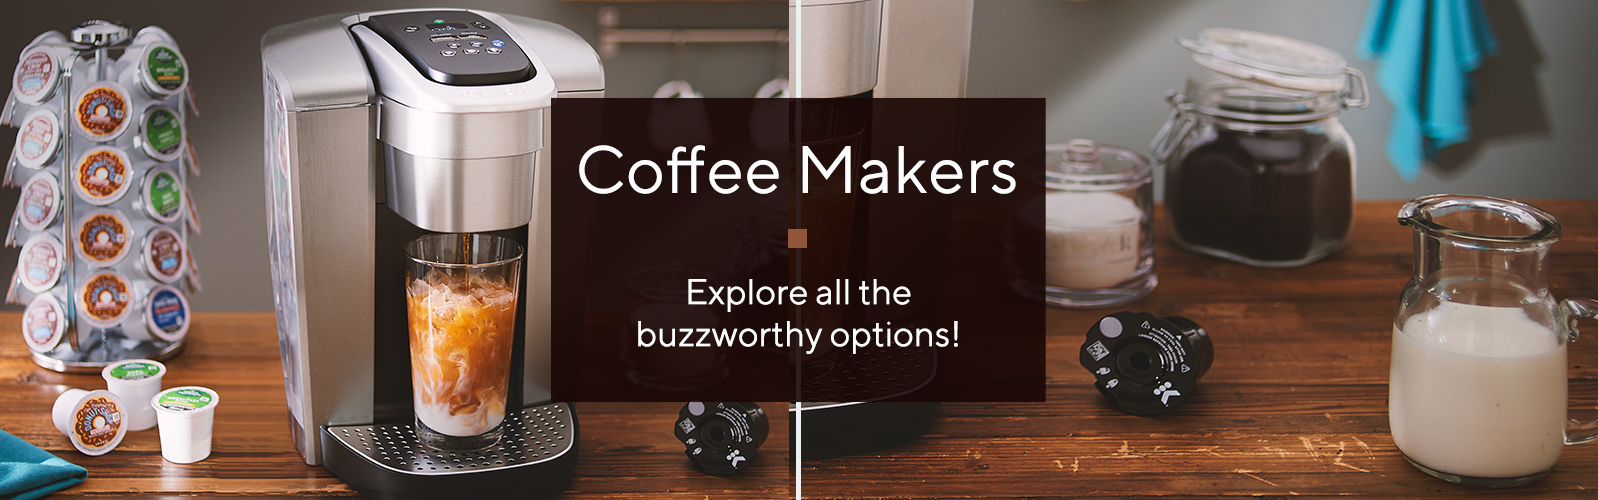 Coffee Makers  Explore all the buzzworthy options!